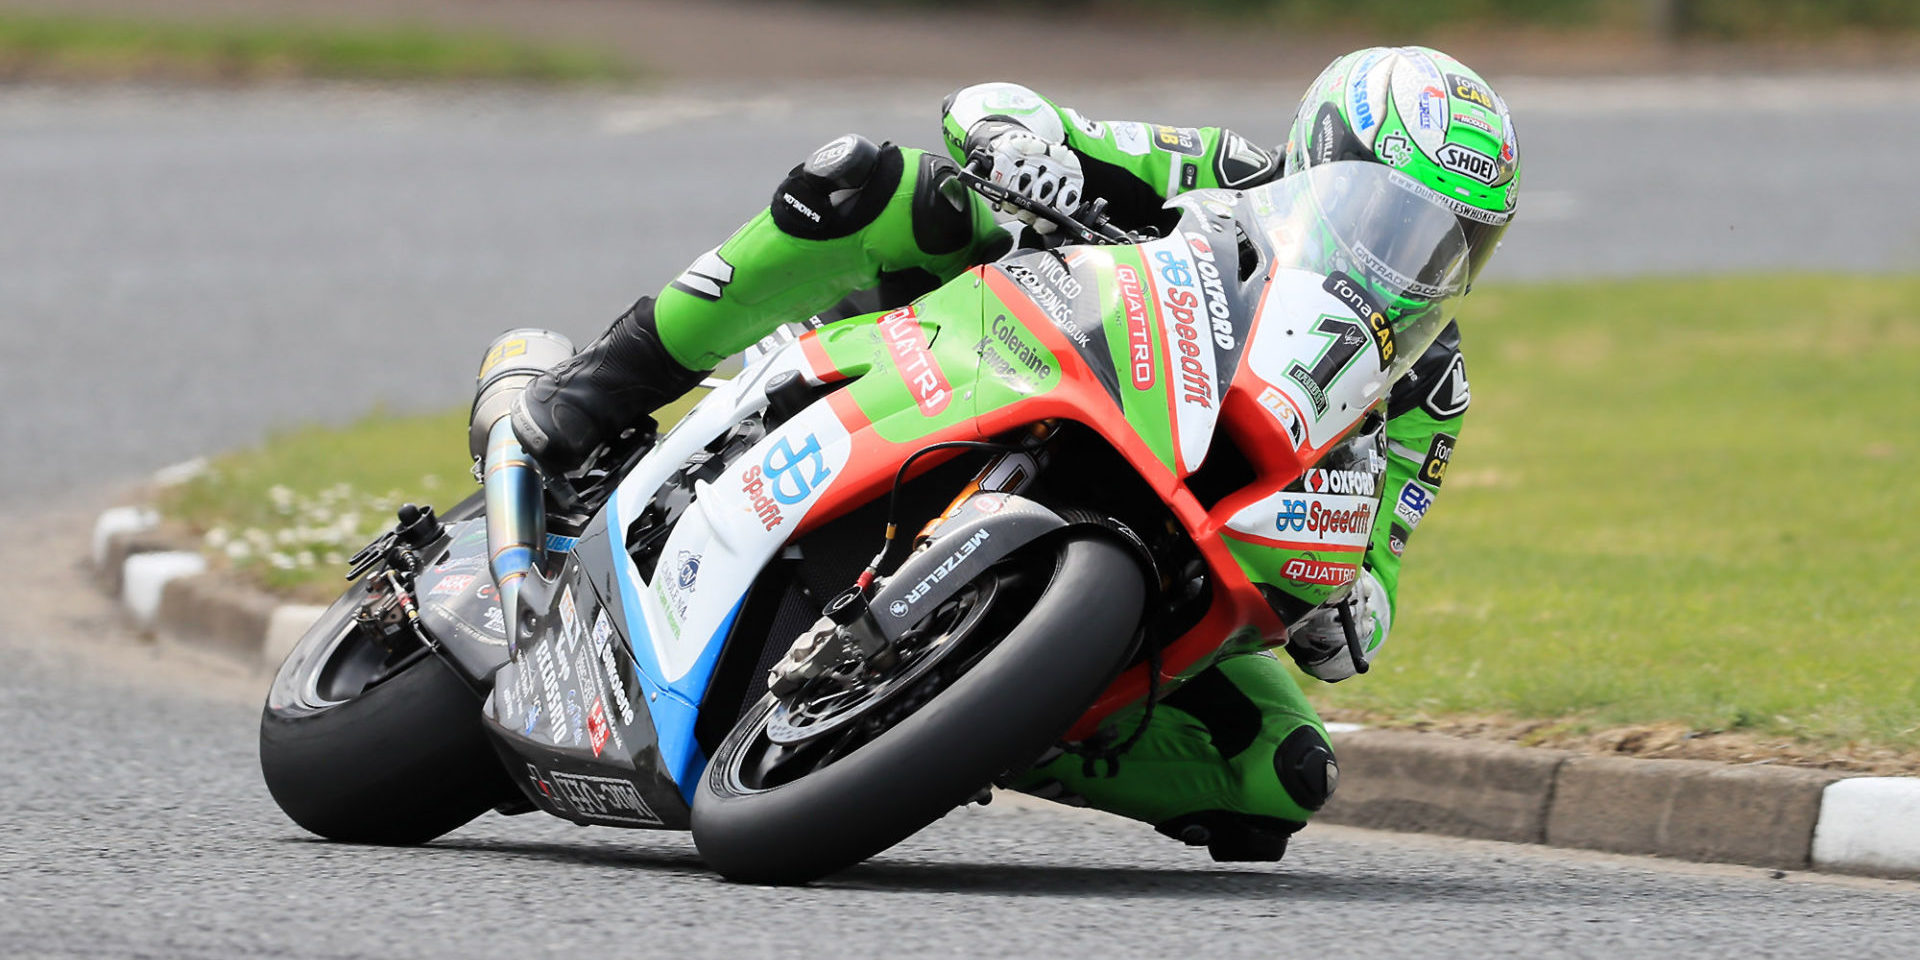 Glenn Irwin (1) in action at the 2019 North West 200. Photo by Pacemaker Press International, courtesy of NW200 Press Office.